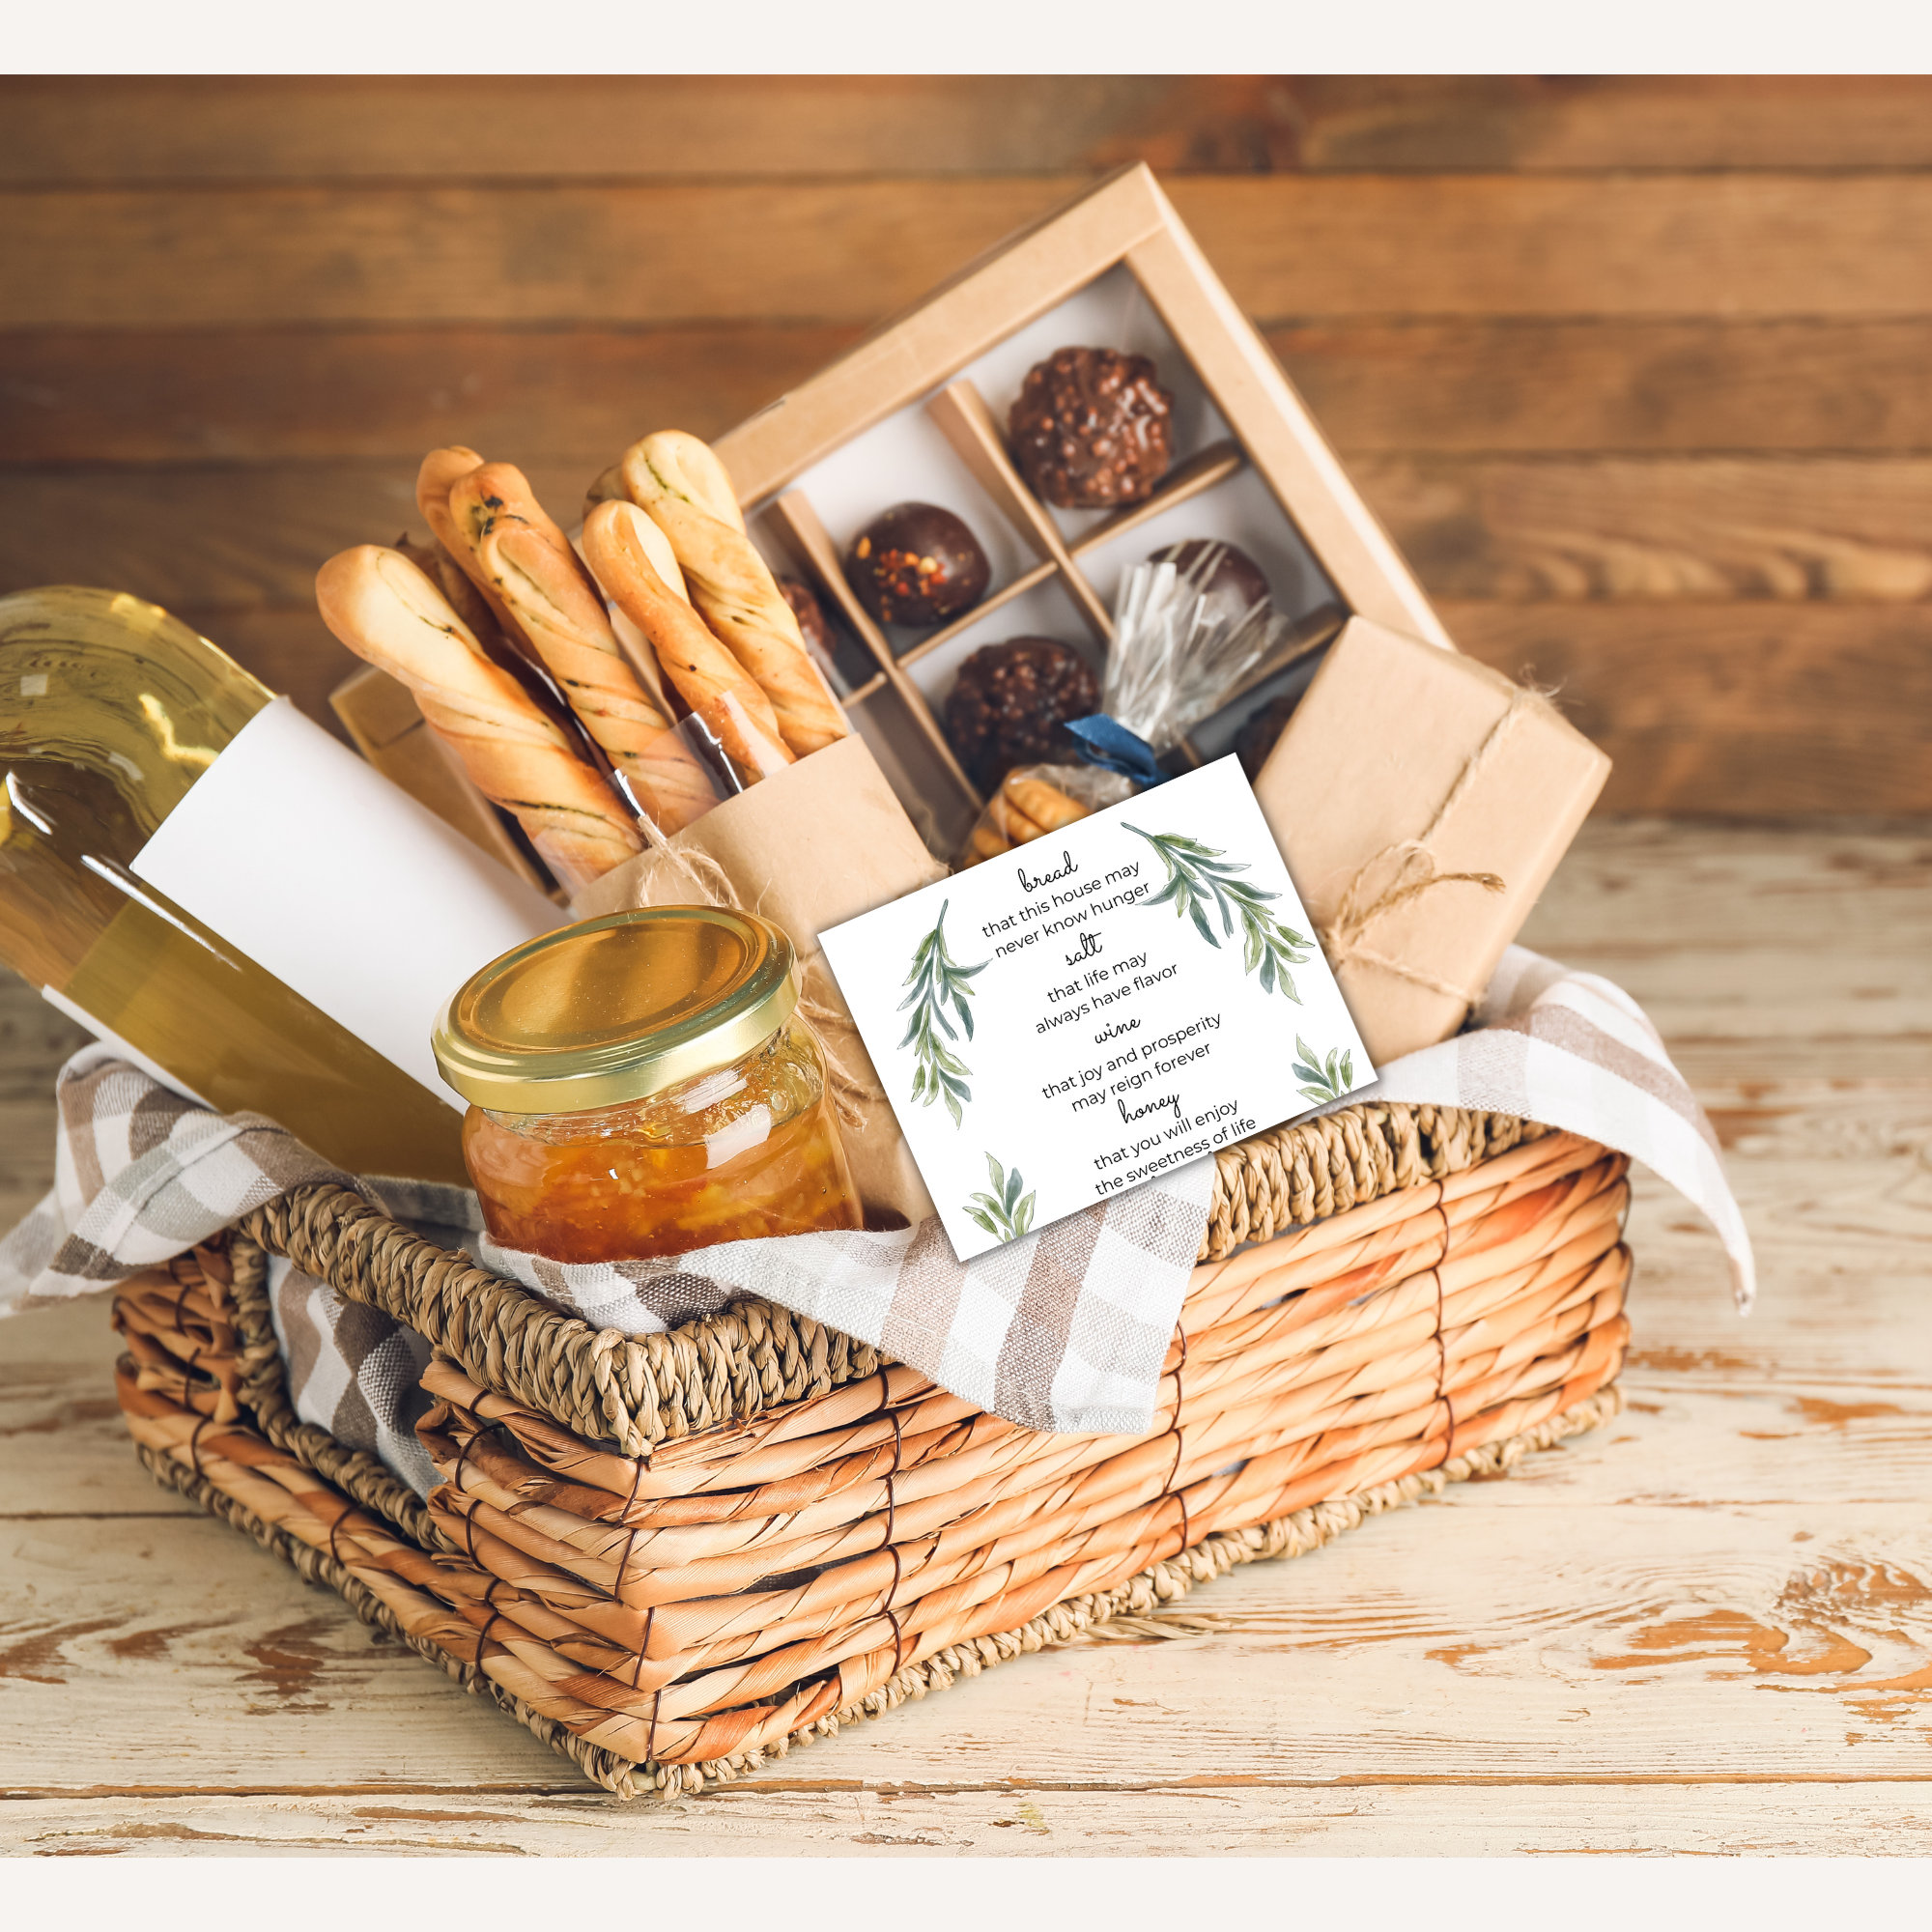 12 Housewarming Gift Baskets to Celebrate a New Home - Something Swanky